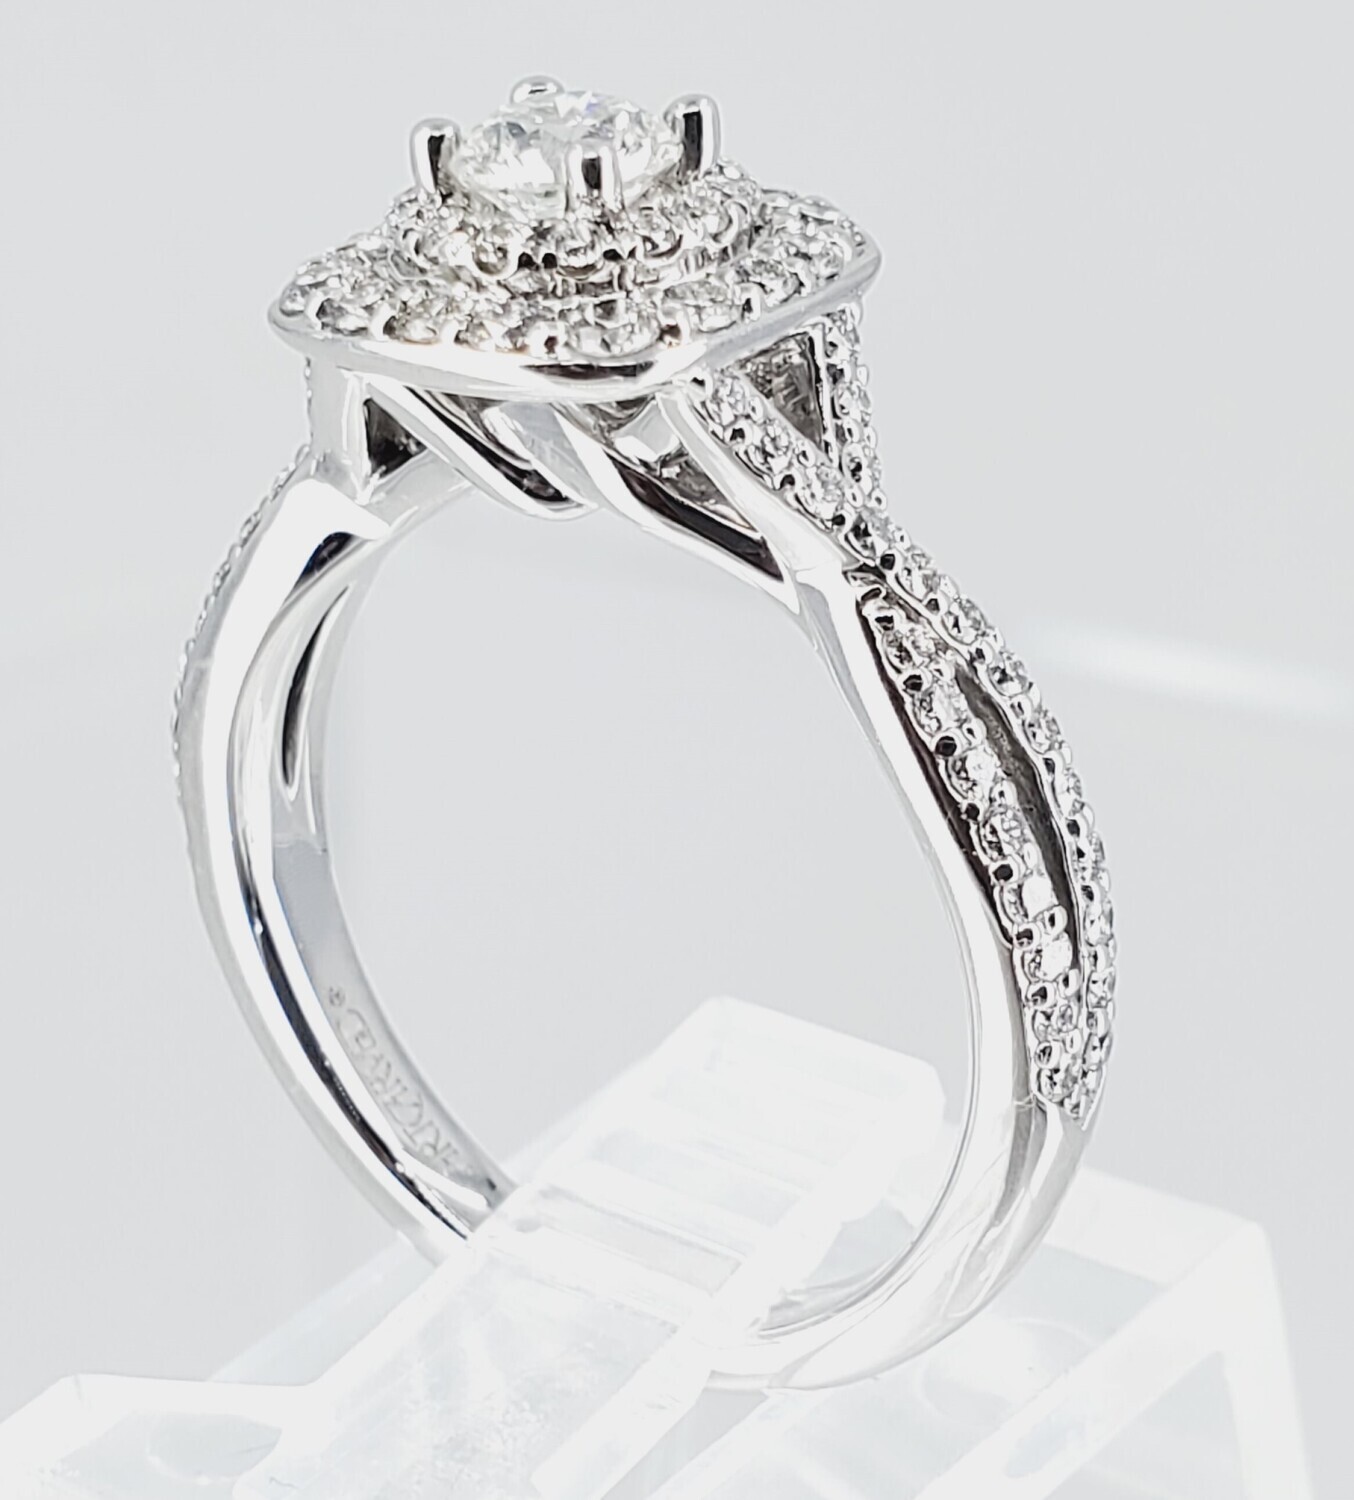 ILLUSION CLUSTER HALO WEDDING RING SIZE : 5 1/4 (SOLD)